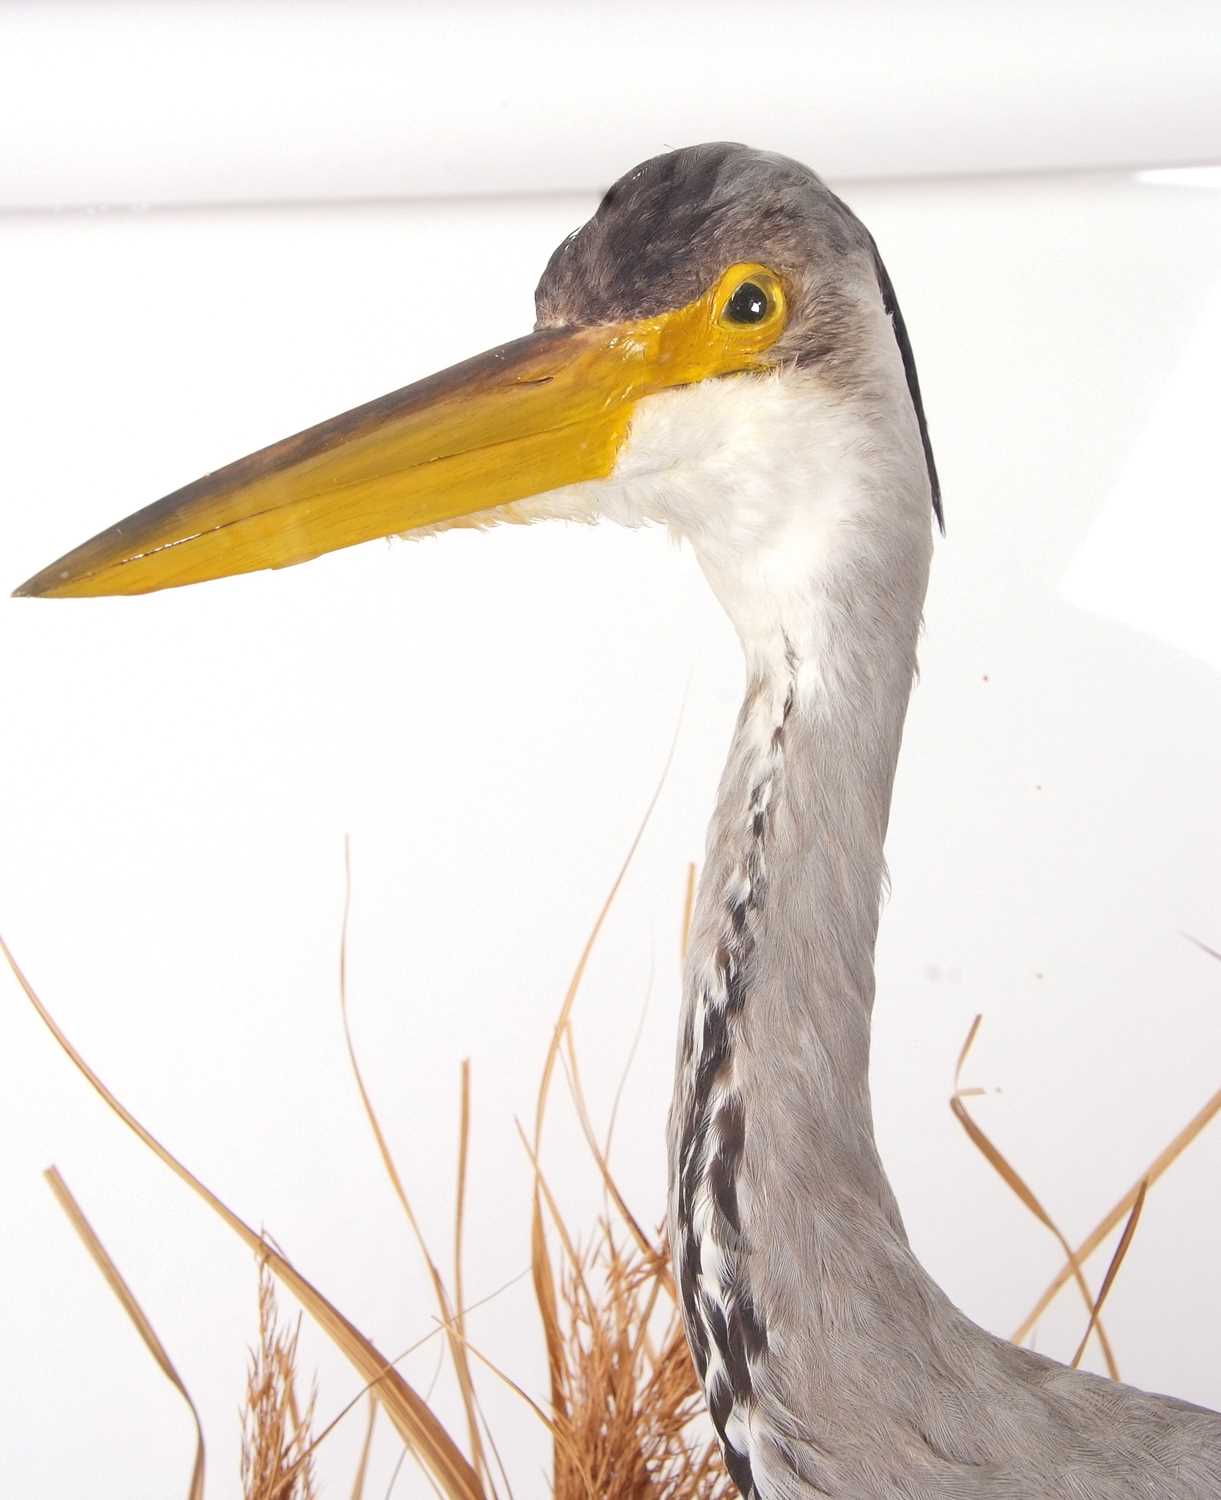 Taxidermy Grey Heron (Ardea cinerea) set in naturalistic setting with reeds, perched on rock. Pebble - Image 3 of 3